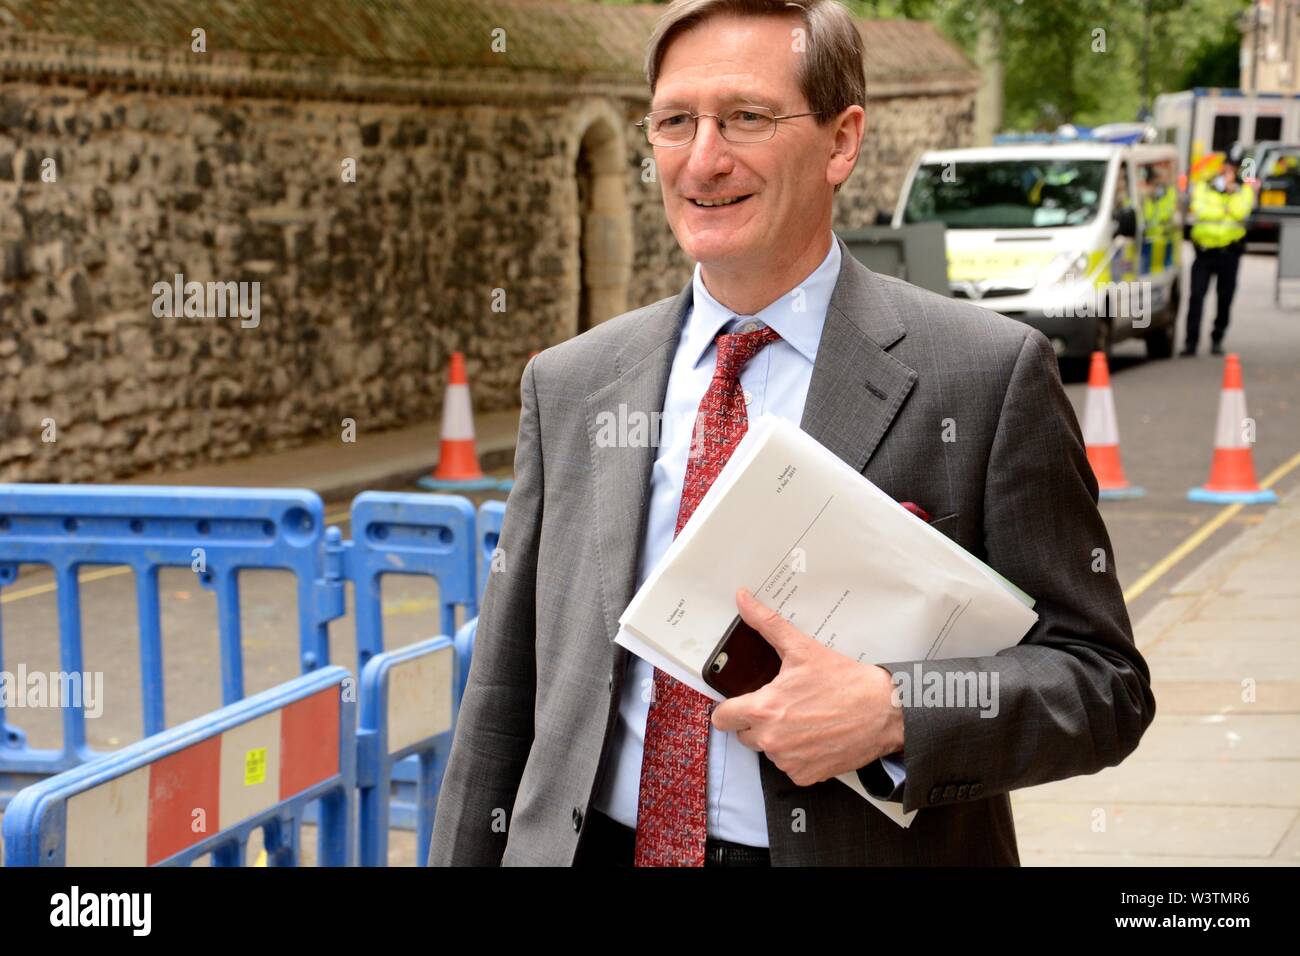 Dominic Grieve in good spirits as he walks past 16 Great College St where Boris Johnson has been holed up for 8 hrs, 17th July 2019. Stock Photo